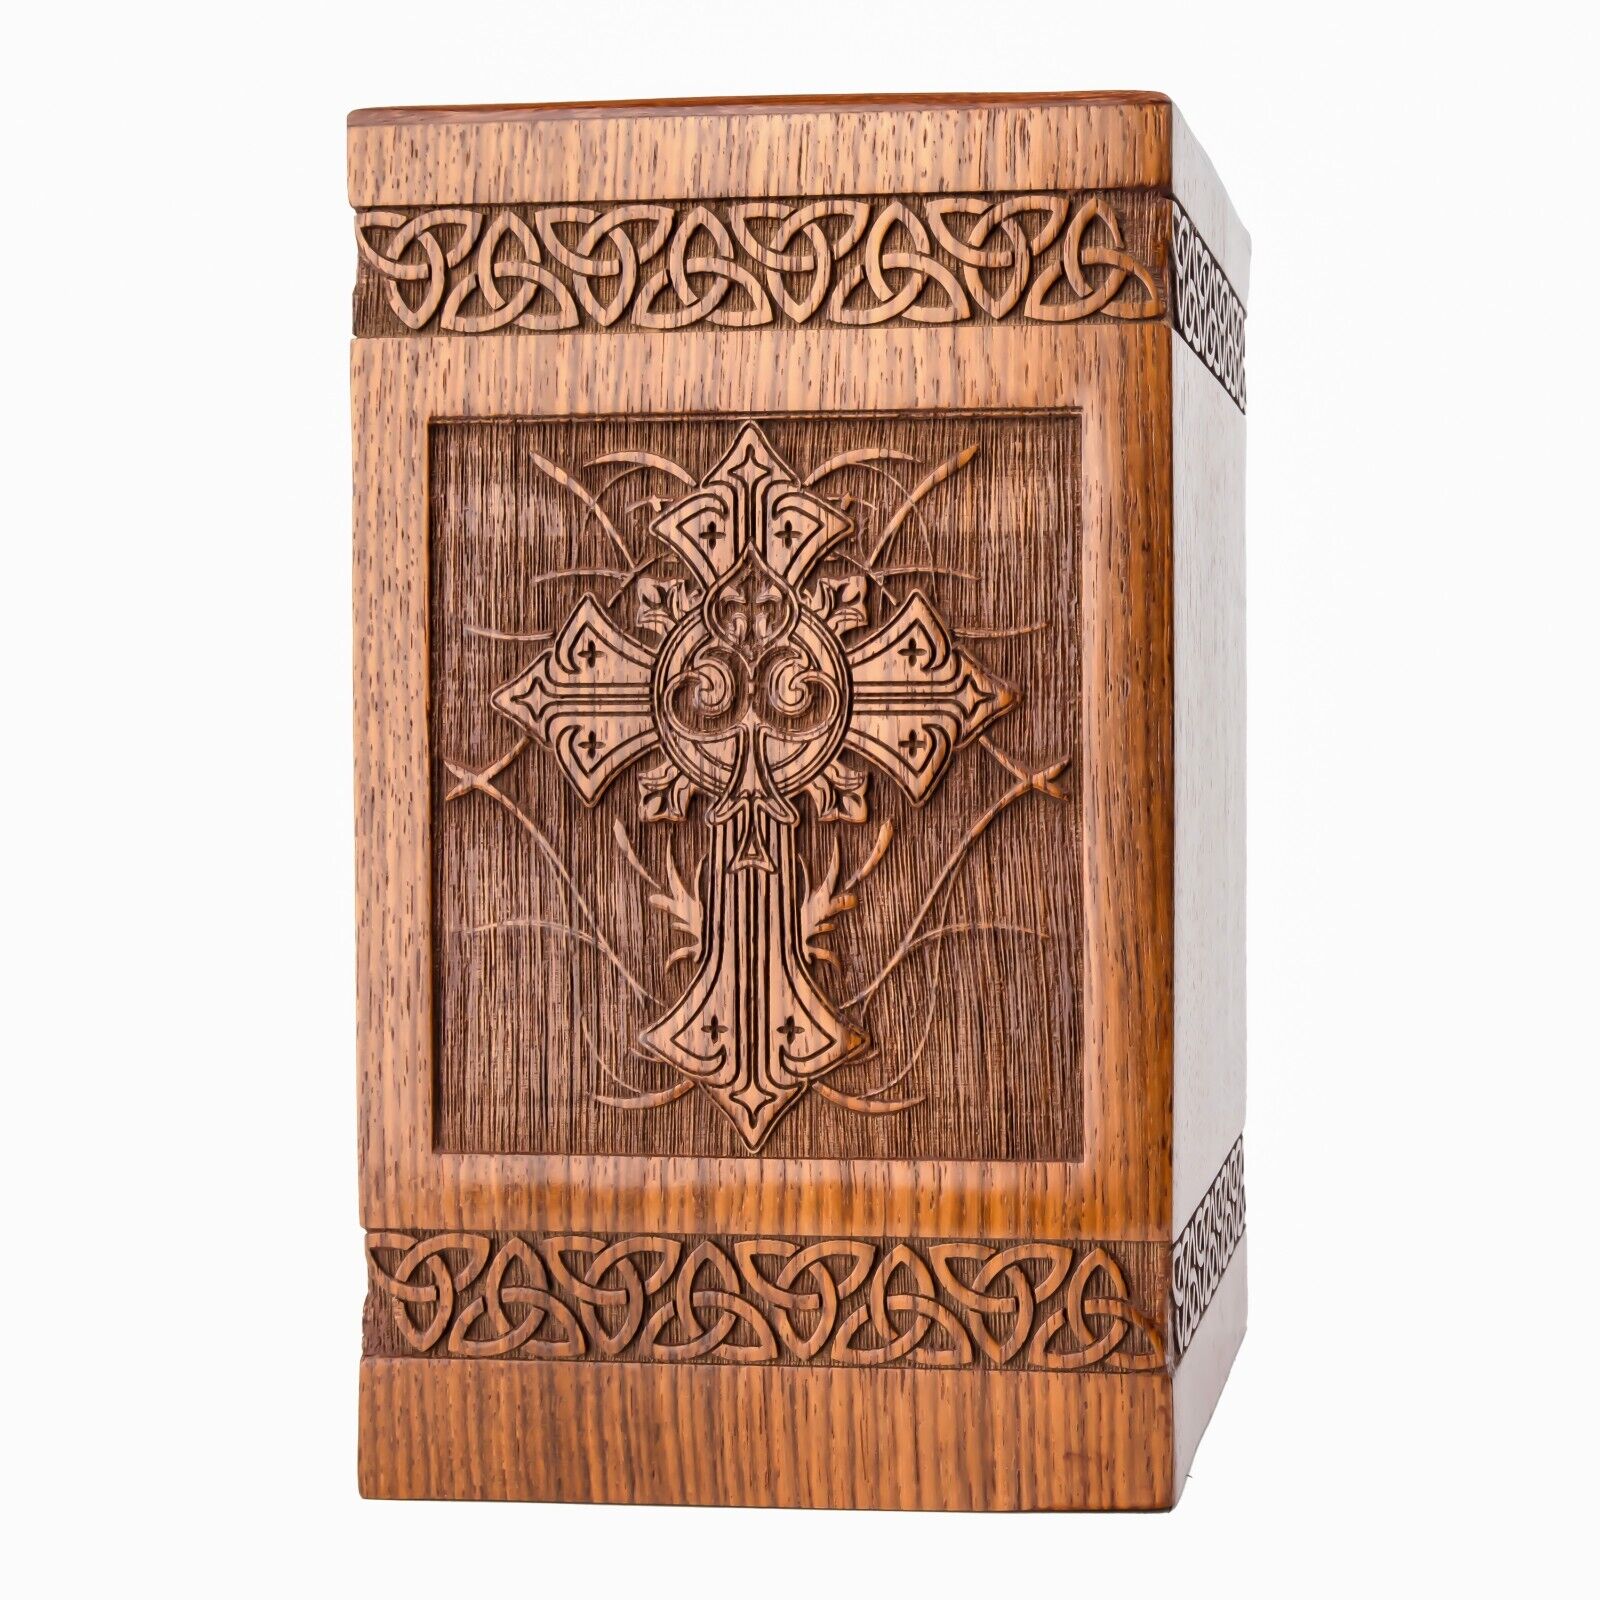 Displayex India Rosewood Engraved Cross Urns for Human Ashes Adult Male